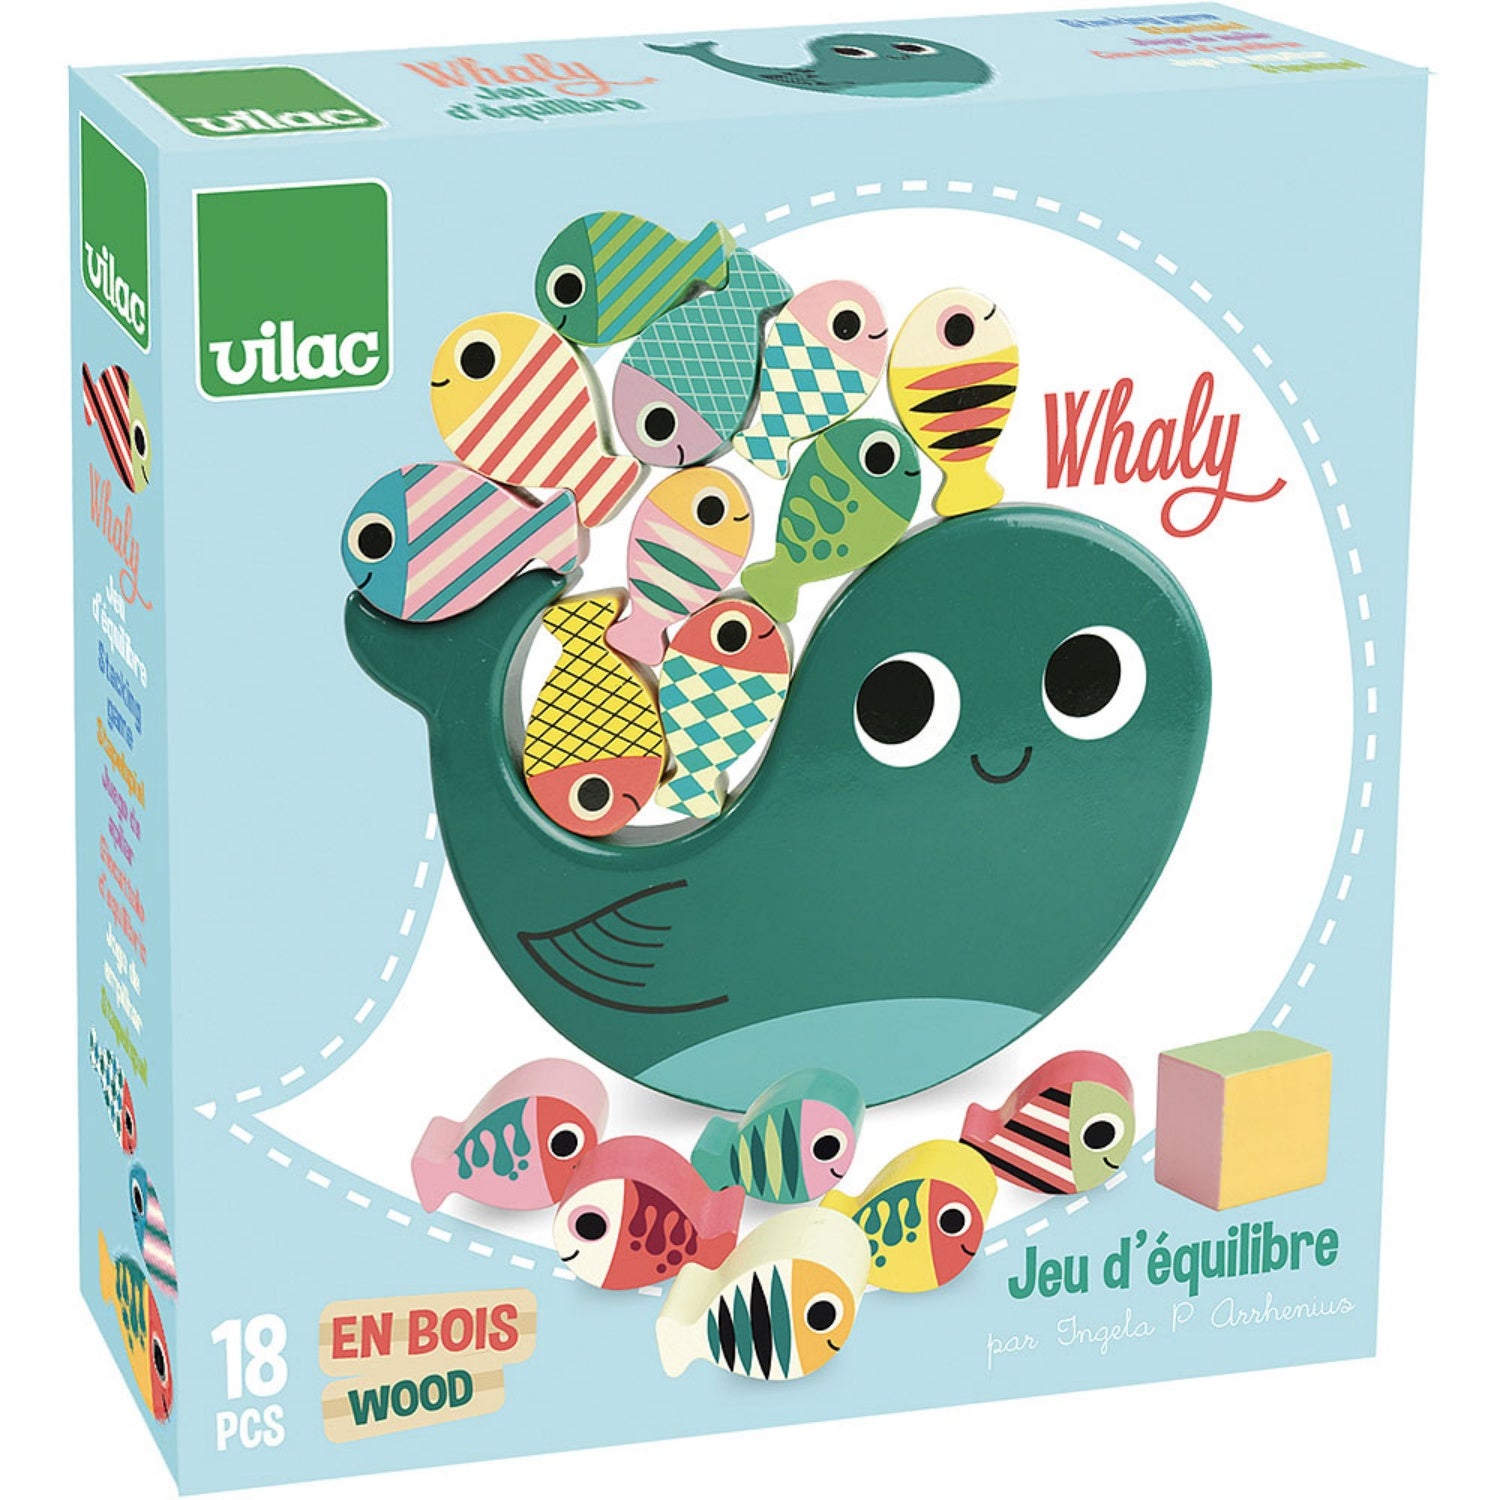 Vilac Whaly Balancing Game Designed by Ingela P. Arrhenius  | Hand-Crafted Wooden Toy | Wooden Stacking Balancing Game | Packaging | BeoVERDE.ie